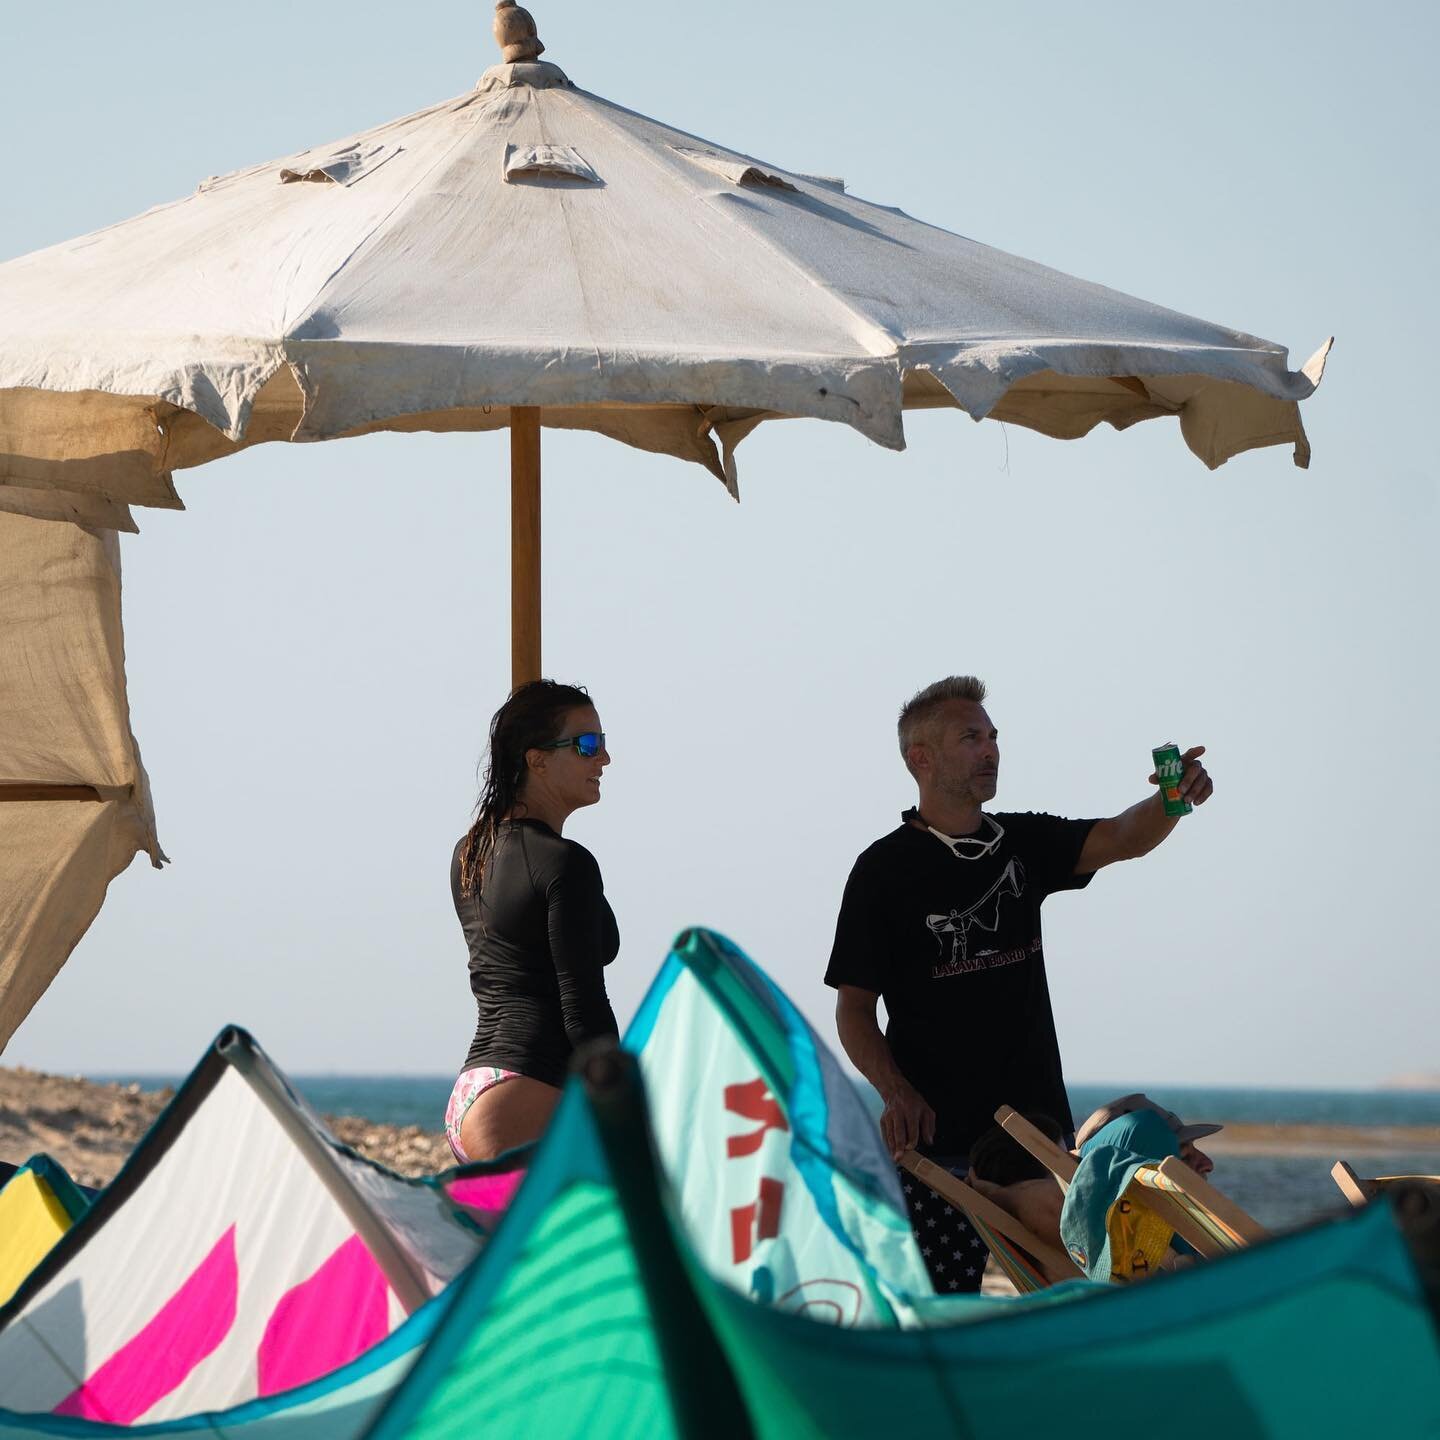 Discussing the next tricks to be learnt, while having a little break during the session on the beach with cold drinks and shade 🏖️ 

#kitecruise #egypt #redsea #explore #kitesurf #kitedestinations #holidays